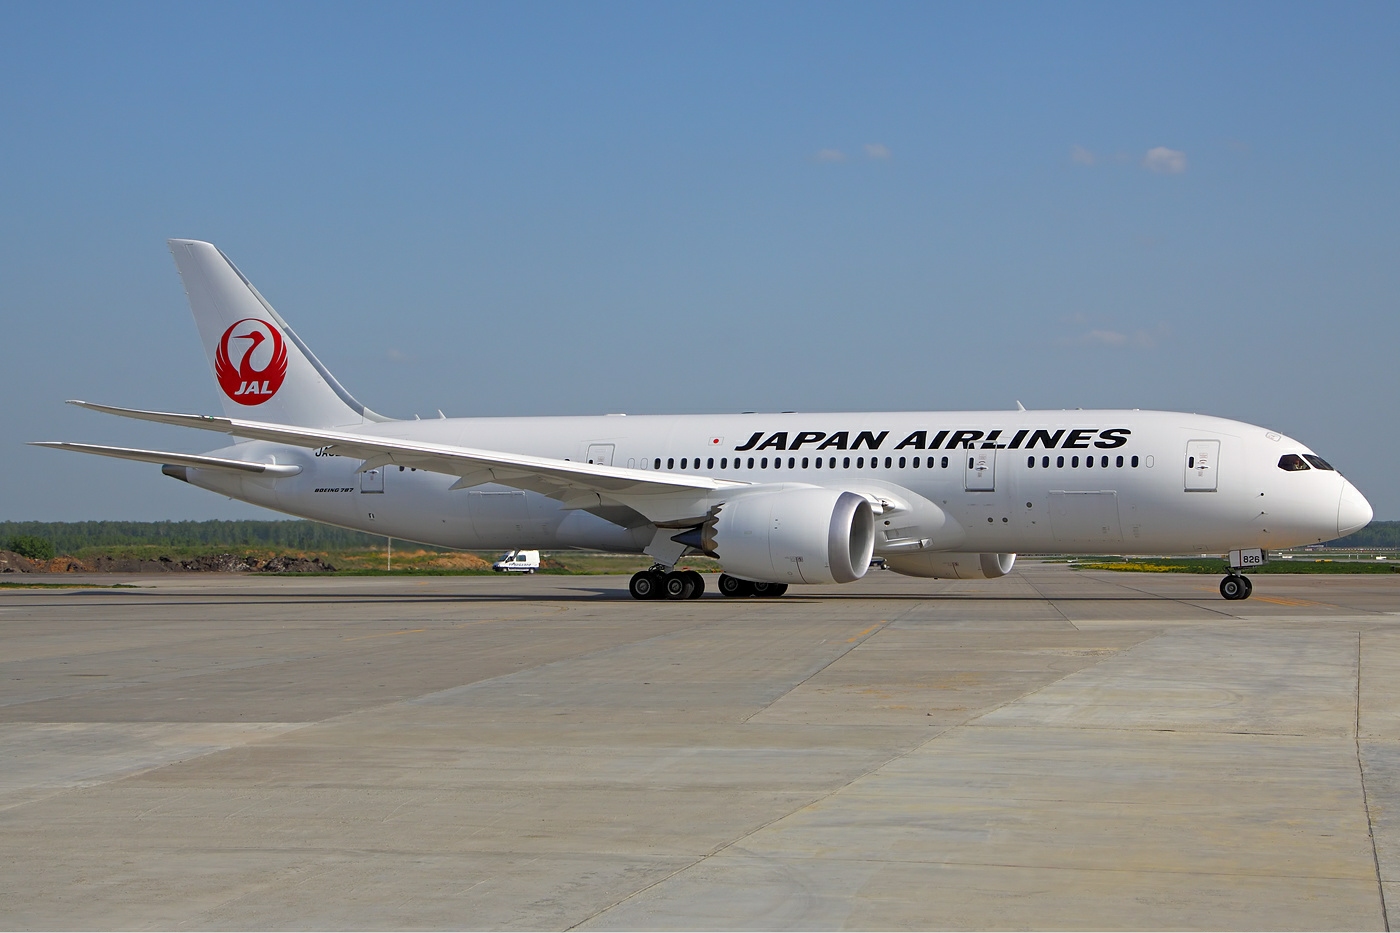 Japan Airlines customers’ data leaked